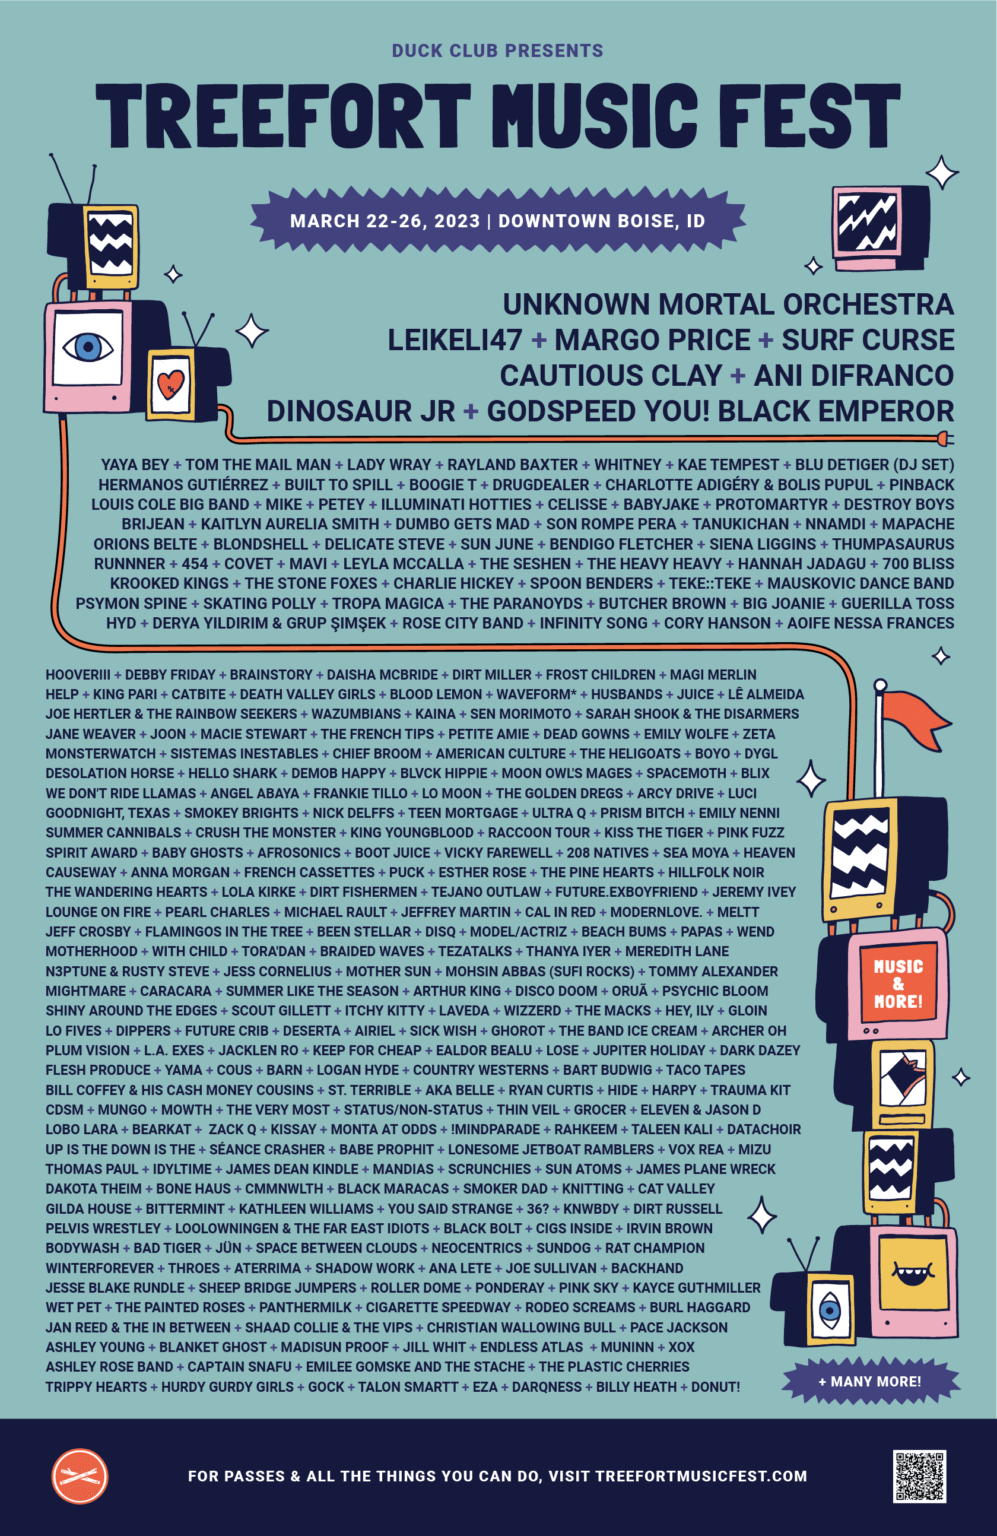 Treefort Music Fest has released a second wave of artists for the 11th annual music and arts festival on March 22-26 in Boise, Idaho